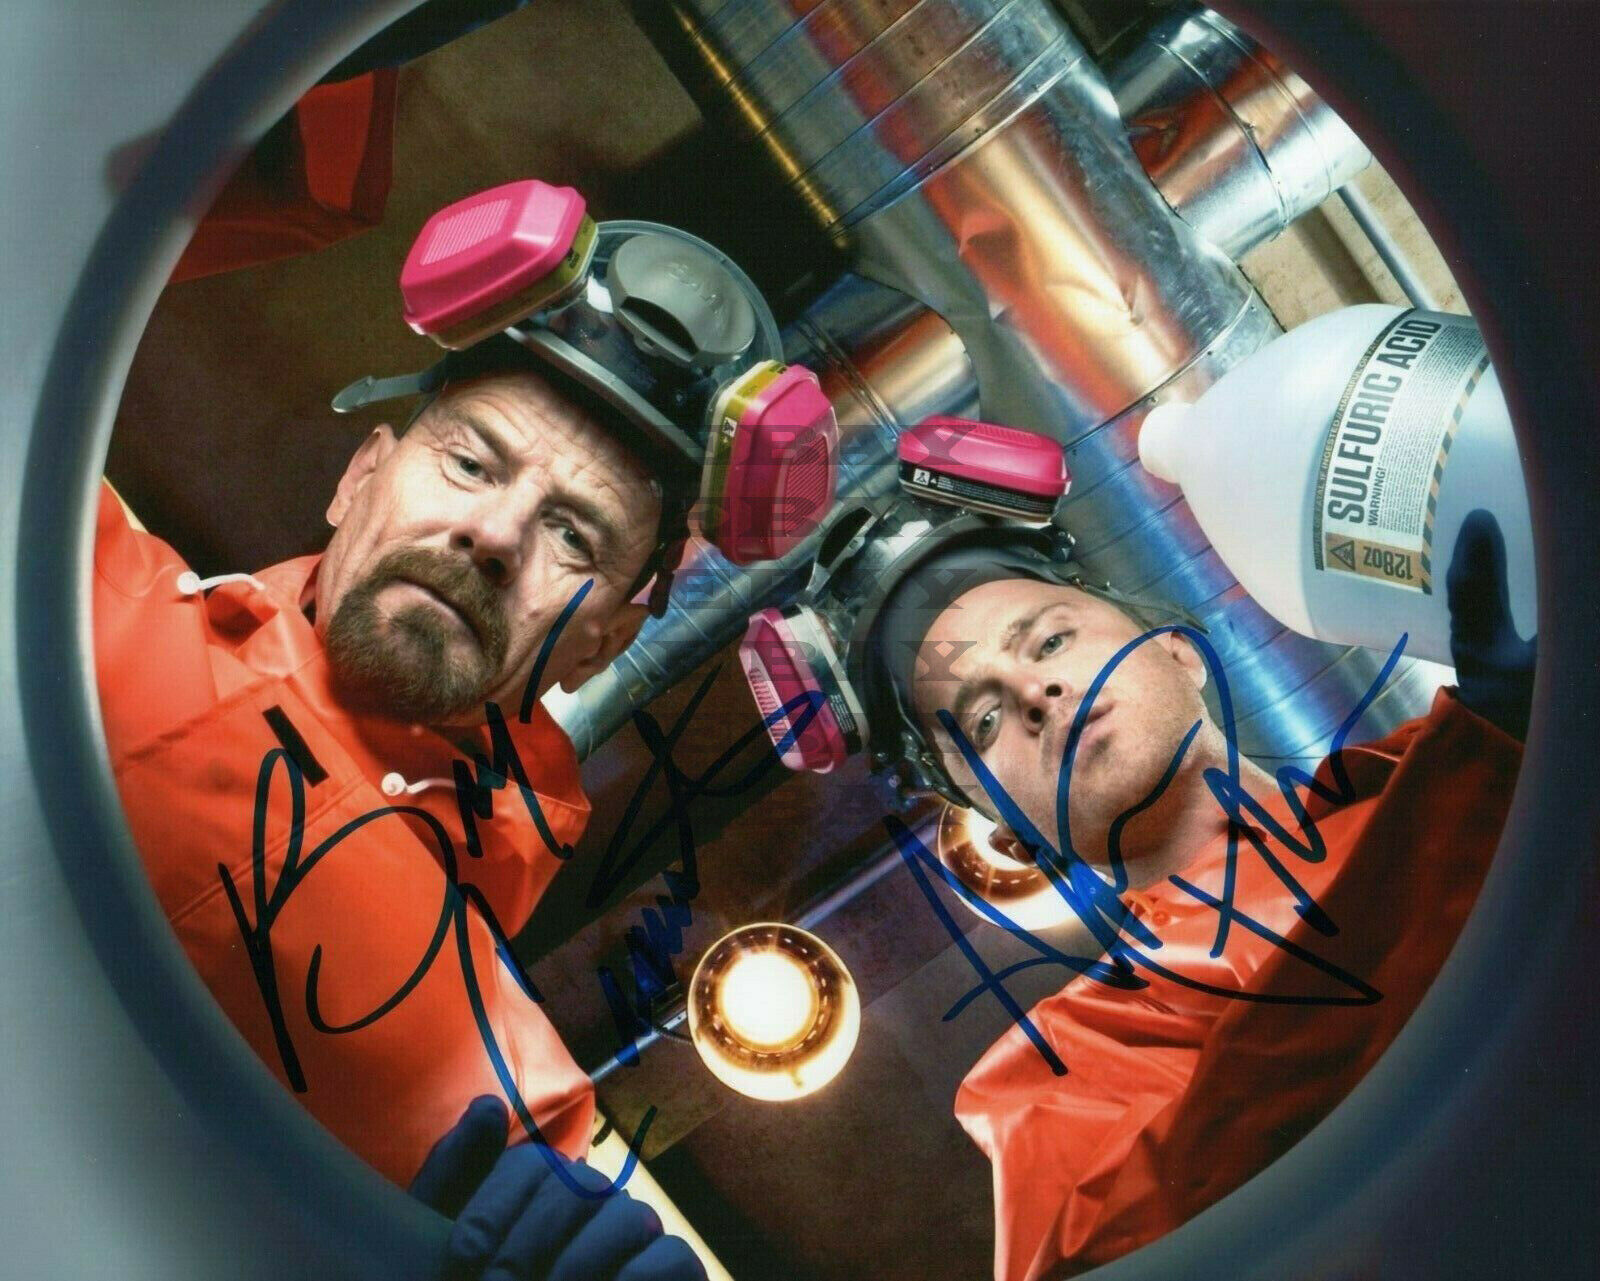 Bryan Cranston & Aaron Paul Autographed Signed 8x10 Photo Poster painting Reprint